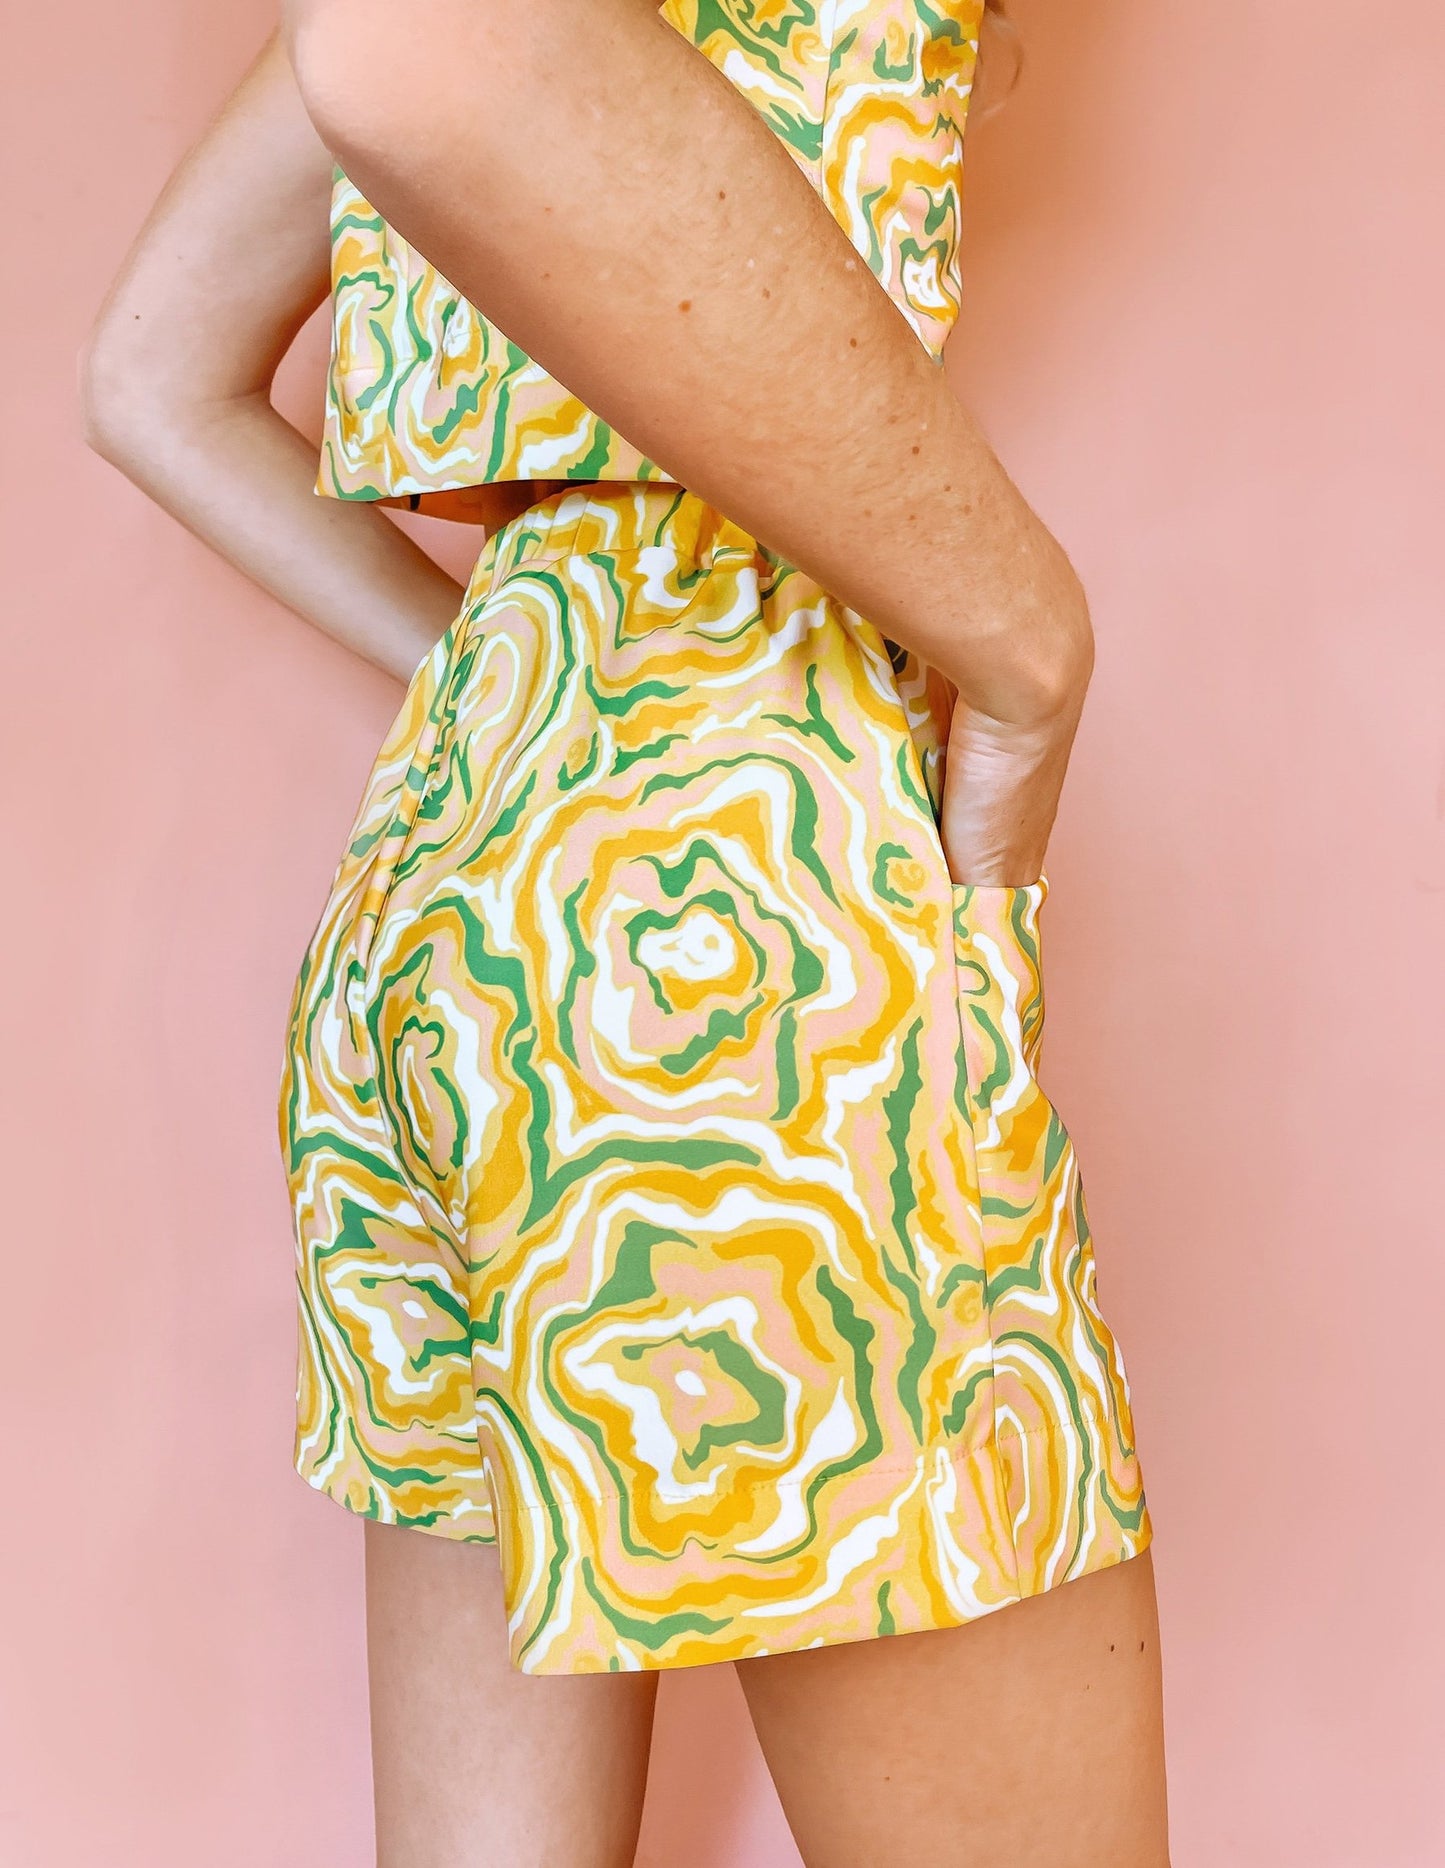 A woman wearing yellow shorts with a green and orange abstract print on it